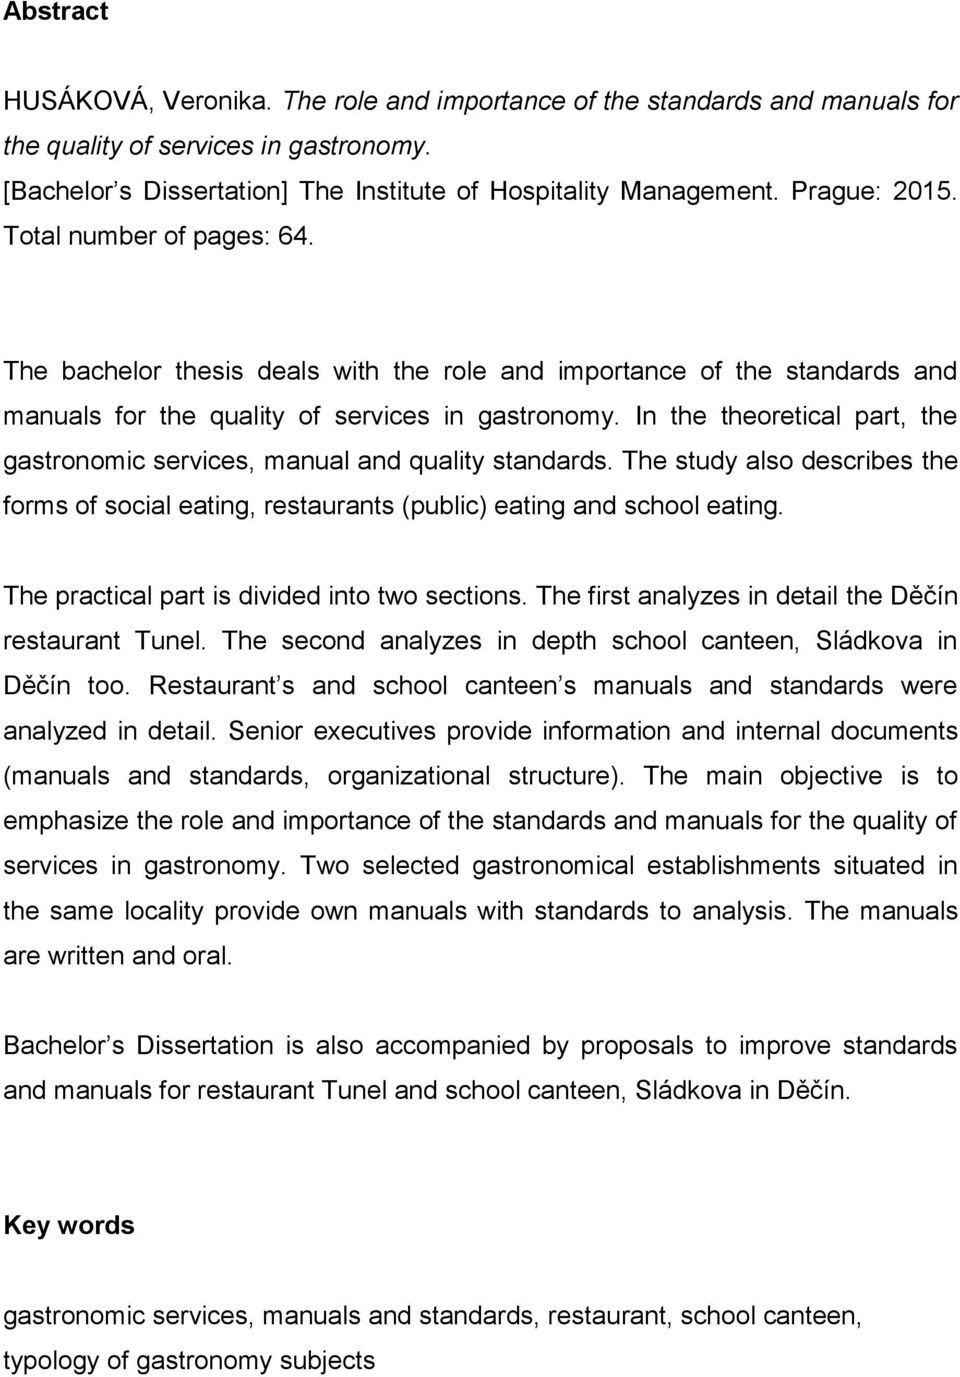 In the theoretical part, the gastronomic services, manual and quality standards. The study also describes the forms of social eating, restaurants (public) eating and school eating.